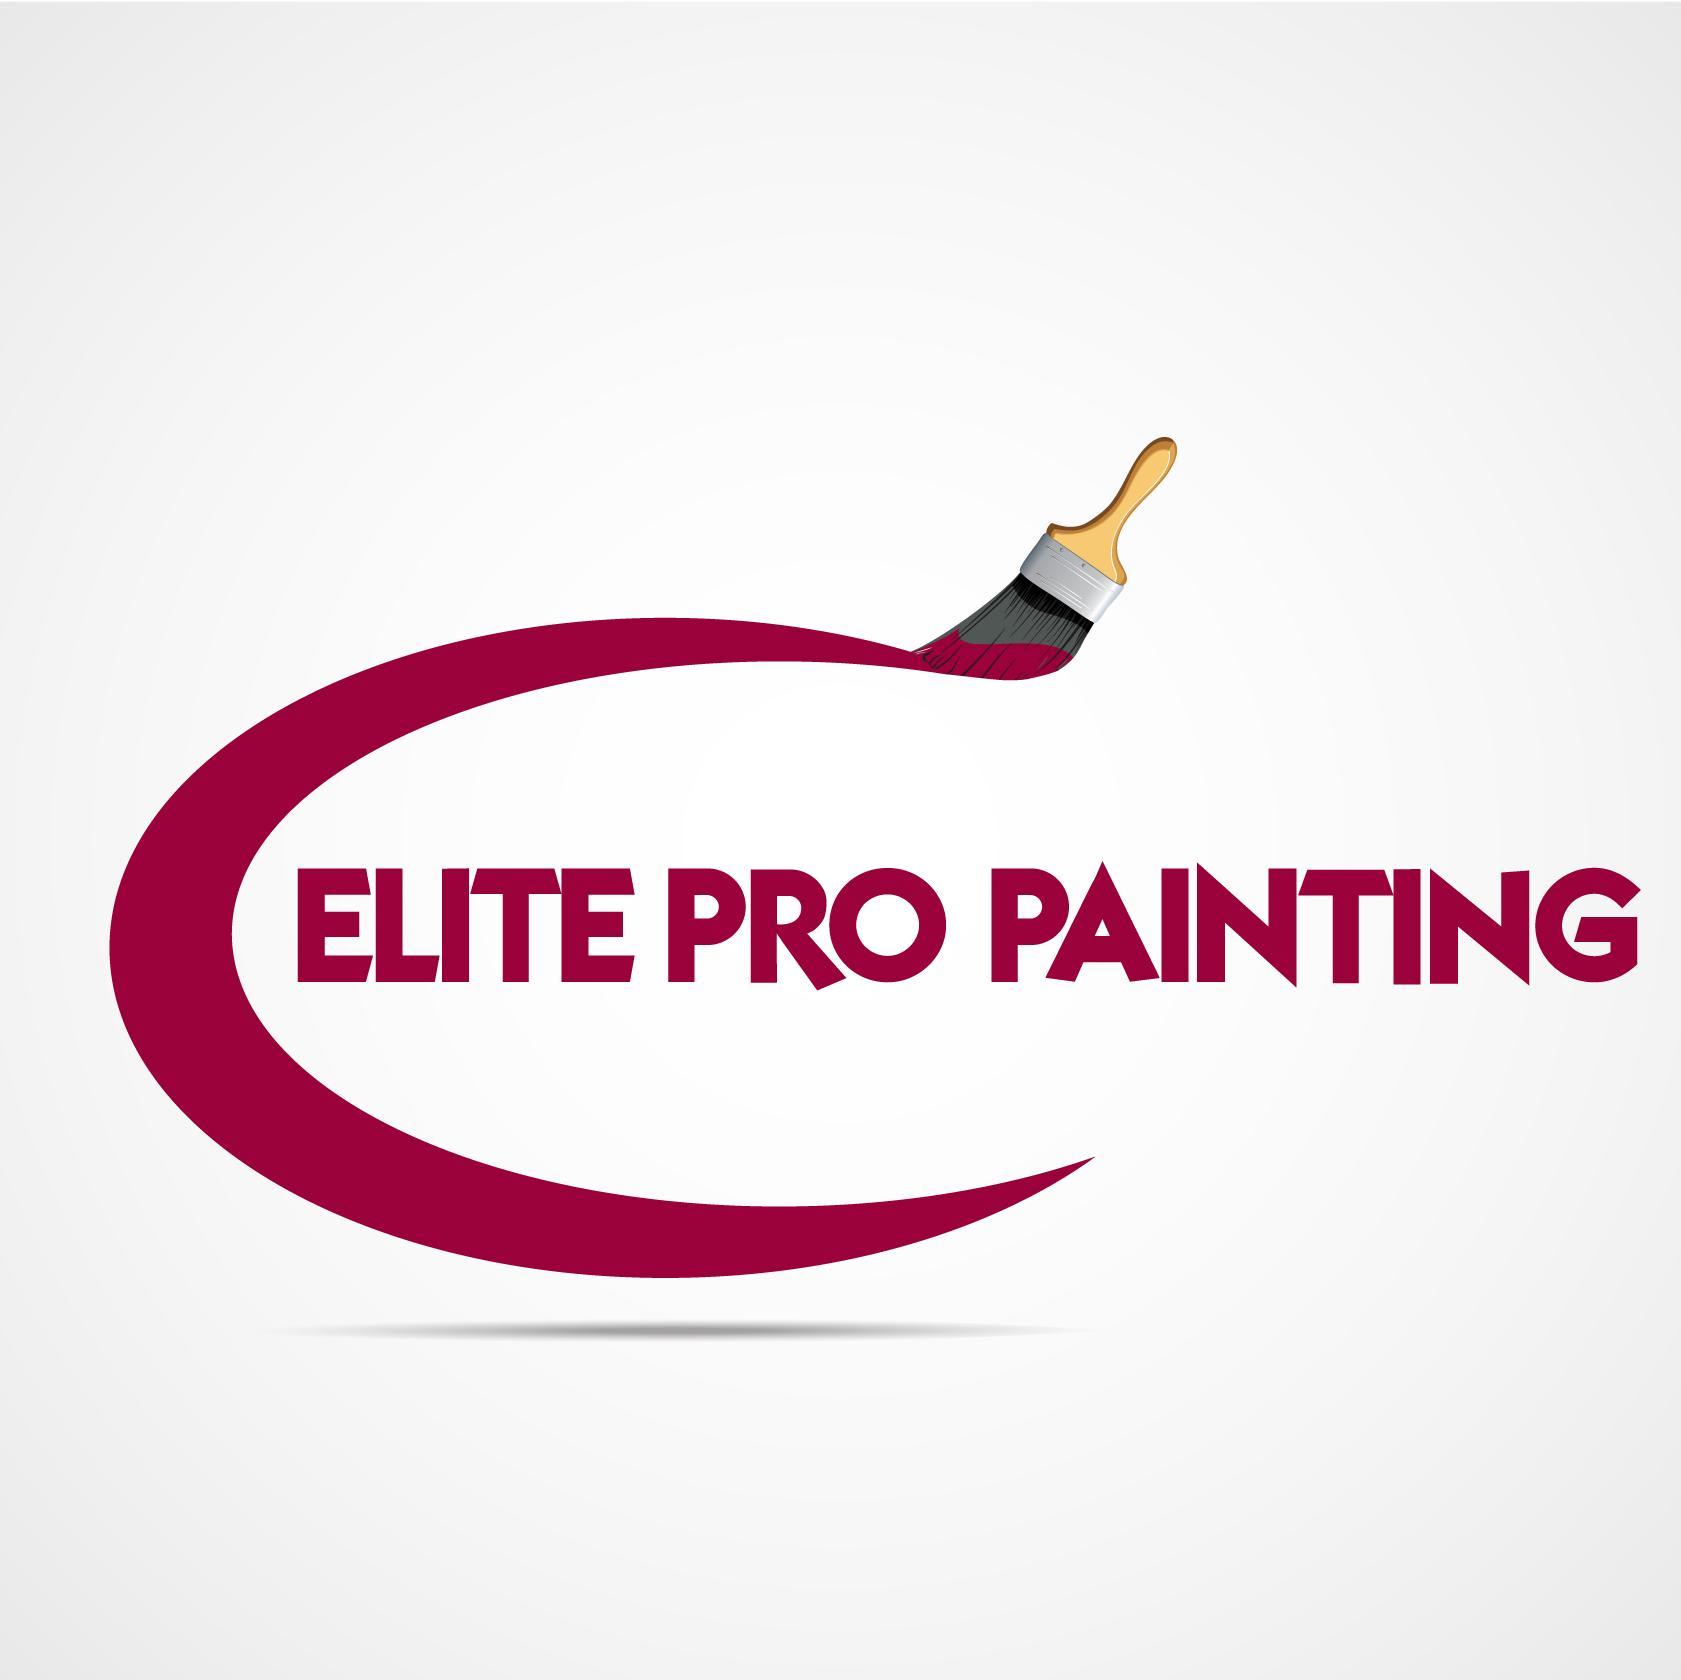 For reliable Indianapolis painters who are focused on delivering high-quality services, call Elite Pro Painting today at (317) 900-4554.